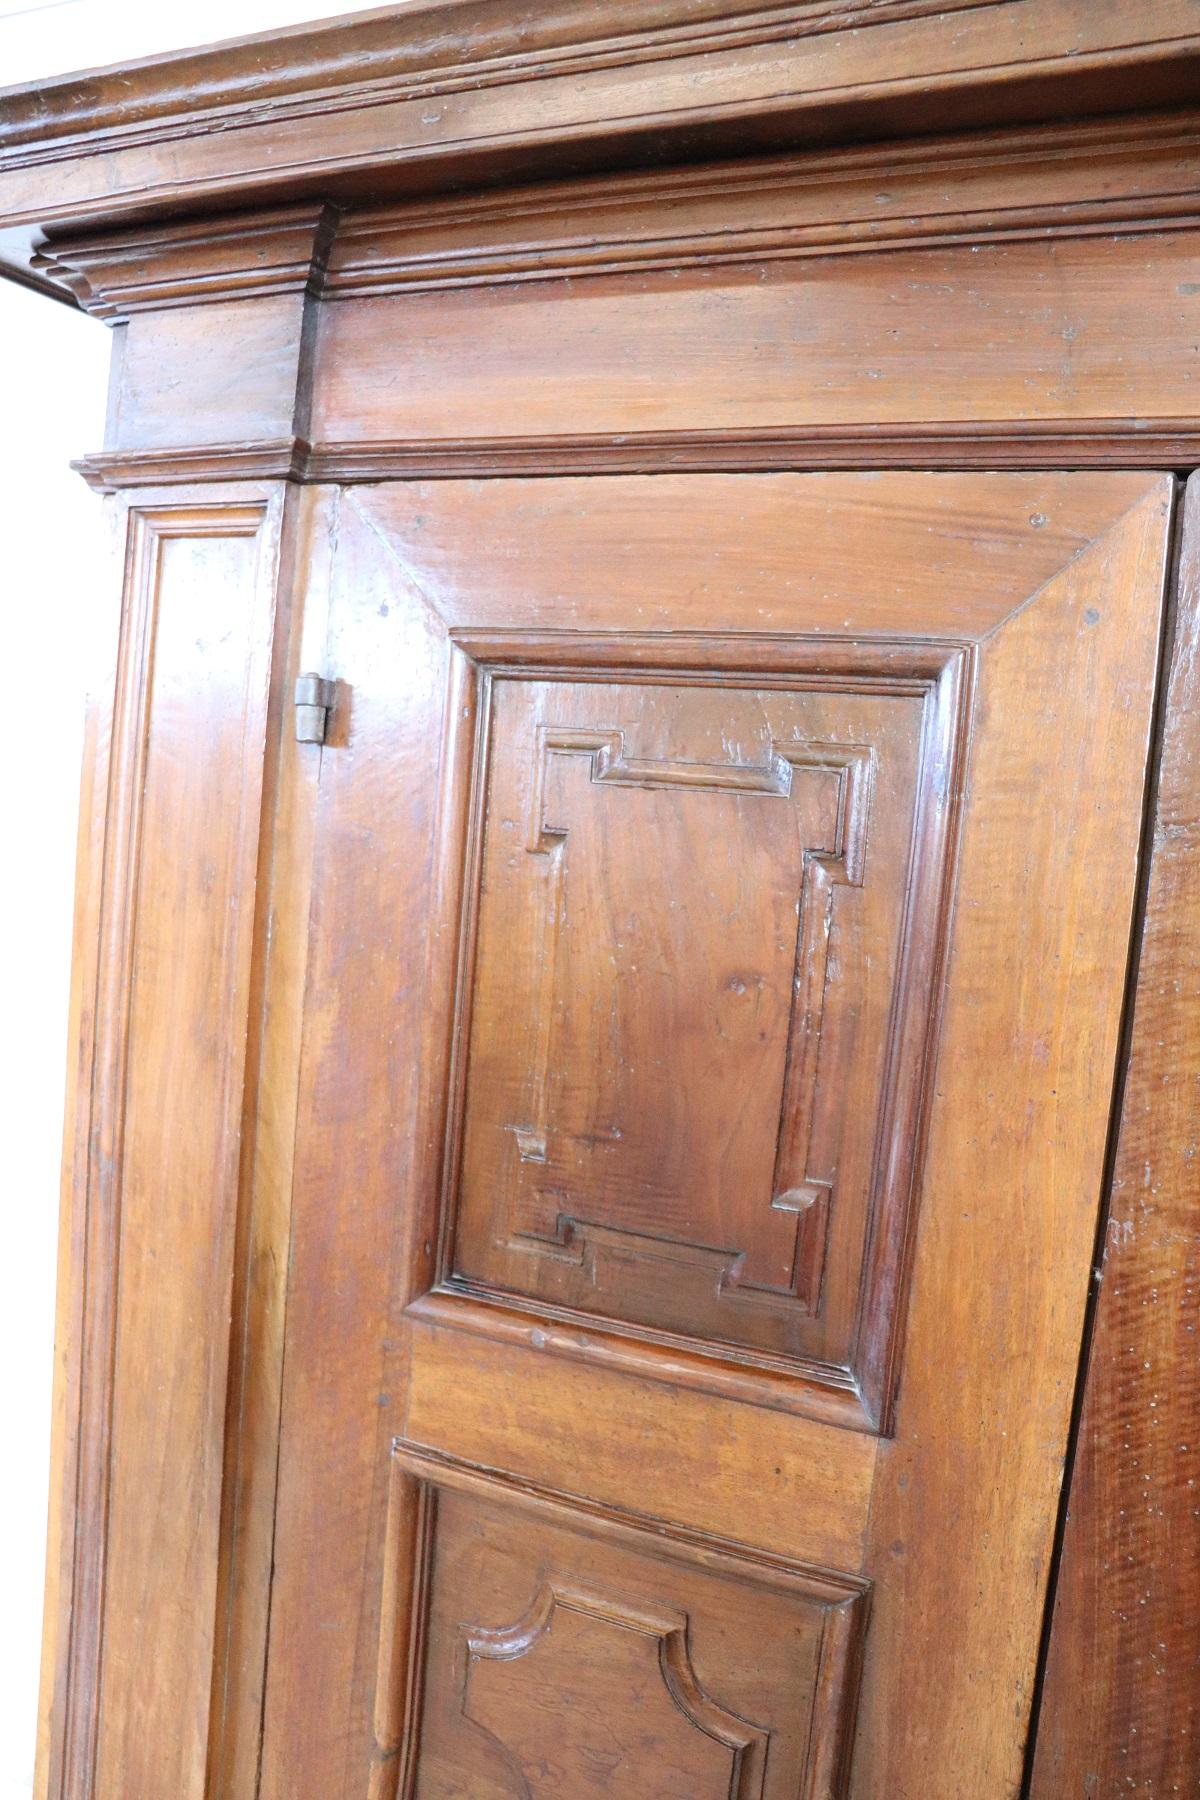 Rare and important antique wardrobe in solid walnut made in the early 17th century Italian Baroque Louis XIV. The line is in fact typical of this period of high period that wanted this type of furnishings of great grandeur made of solid walnut wood